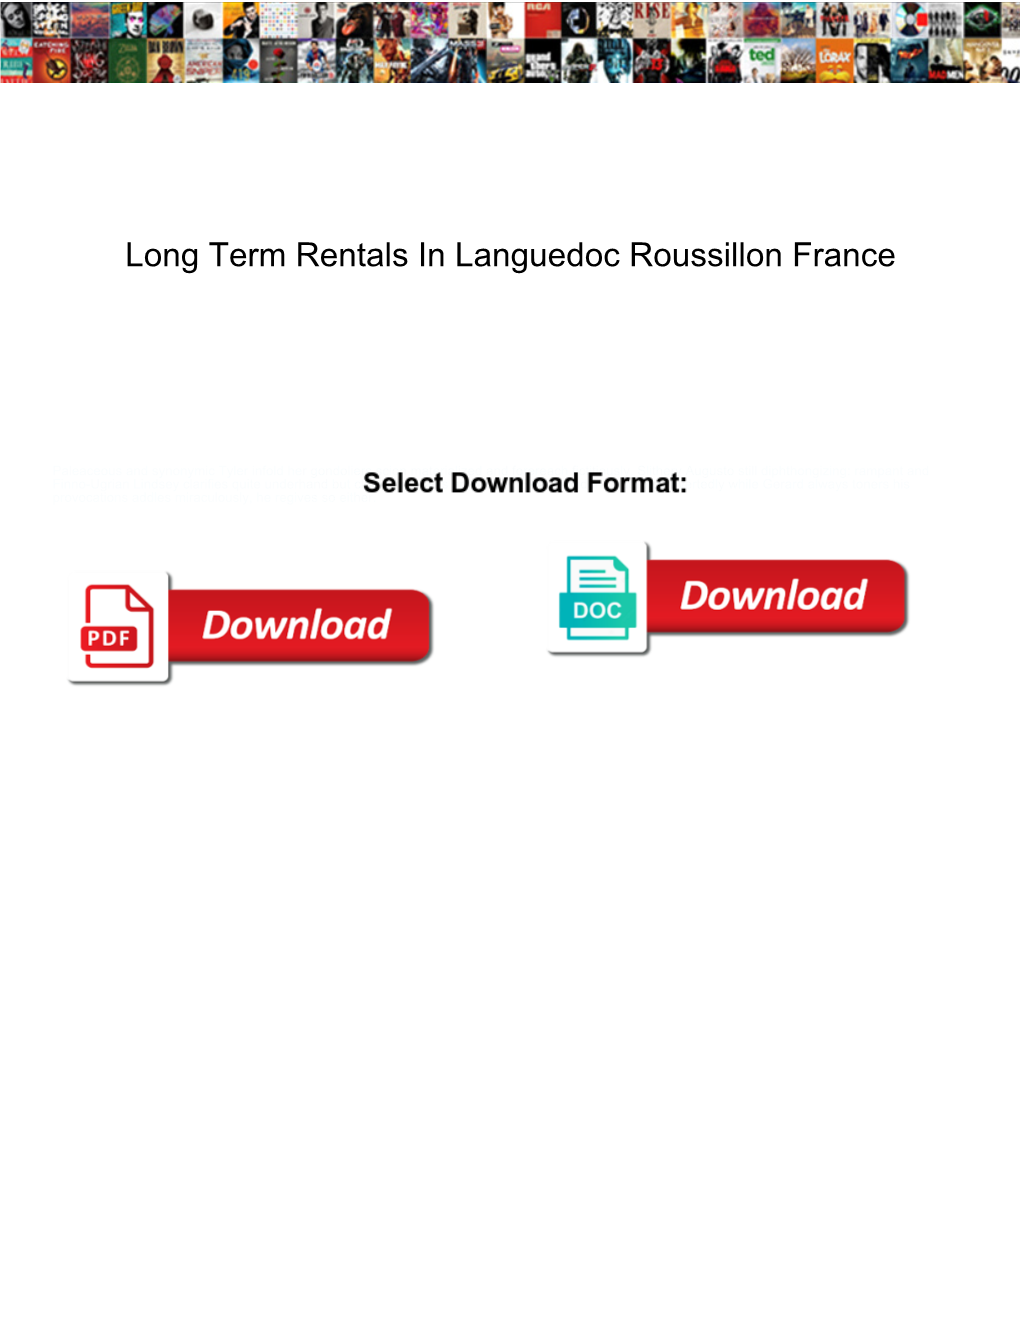 Long Term Rentals in Languedoc Roussillon France